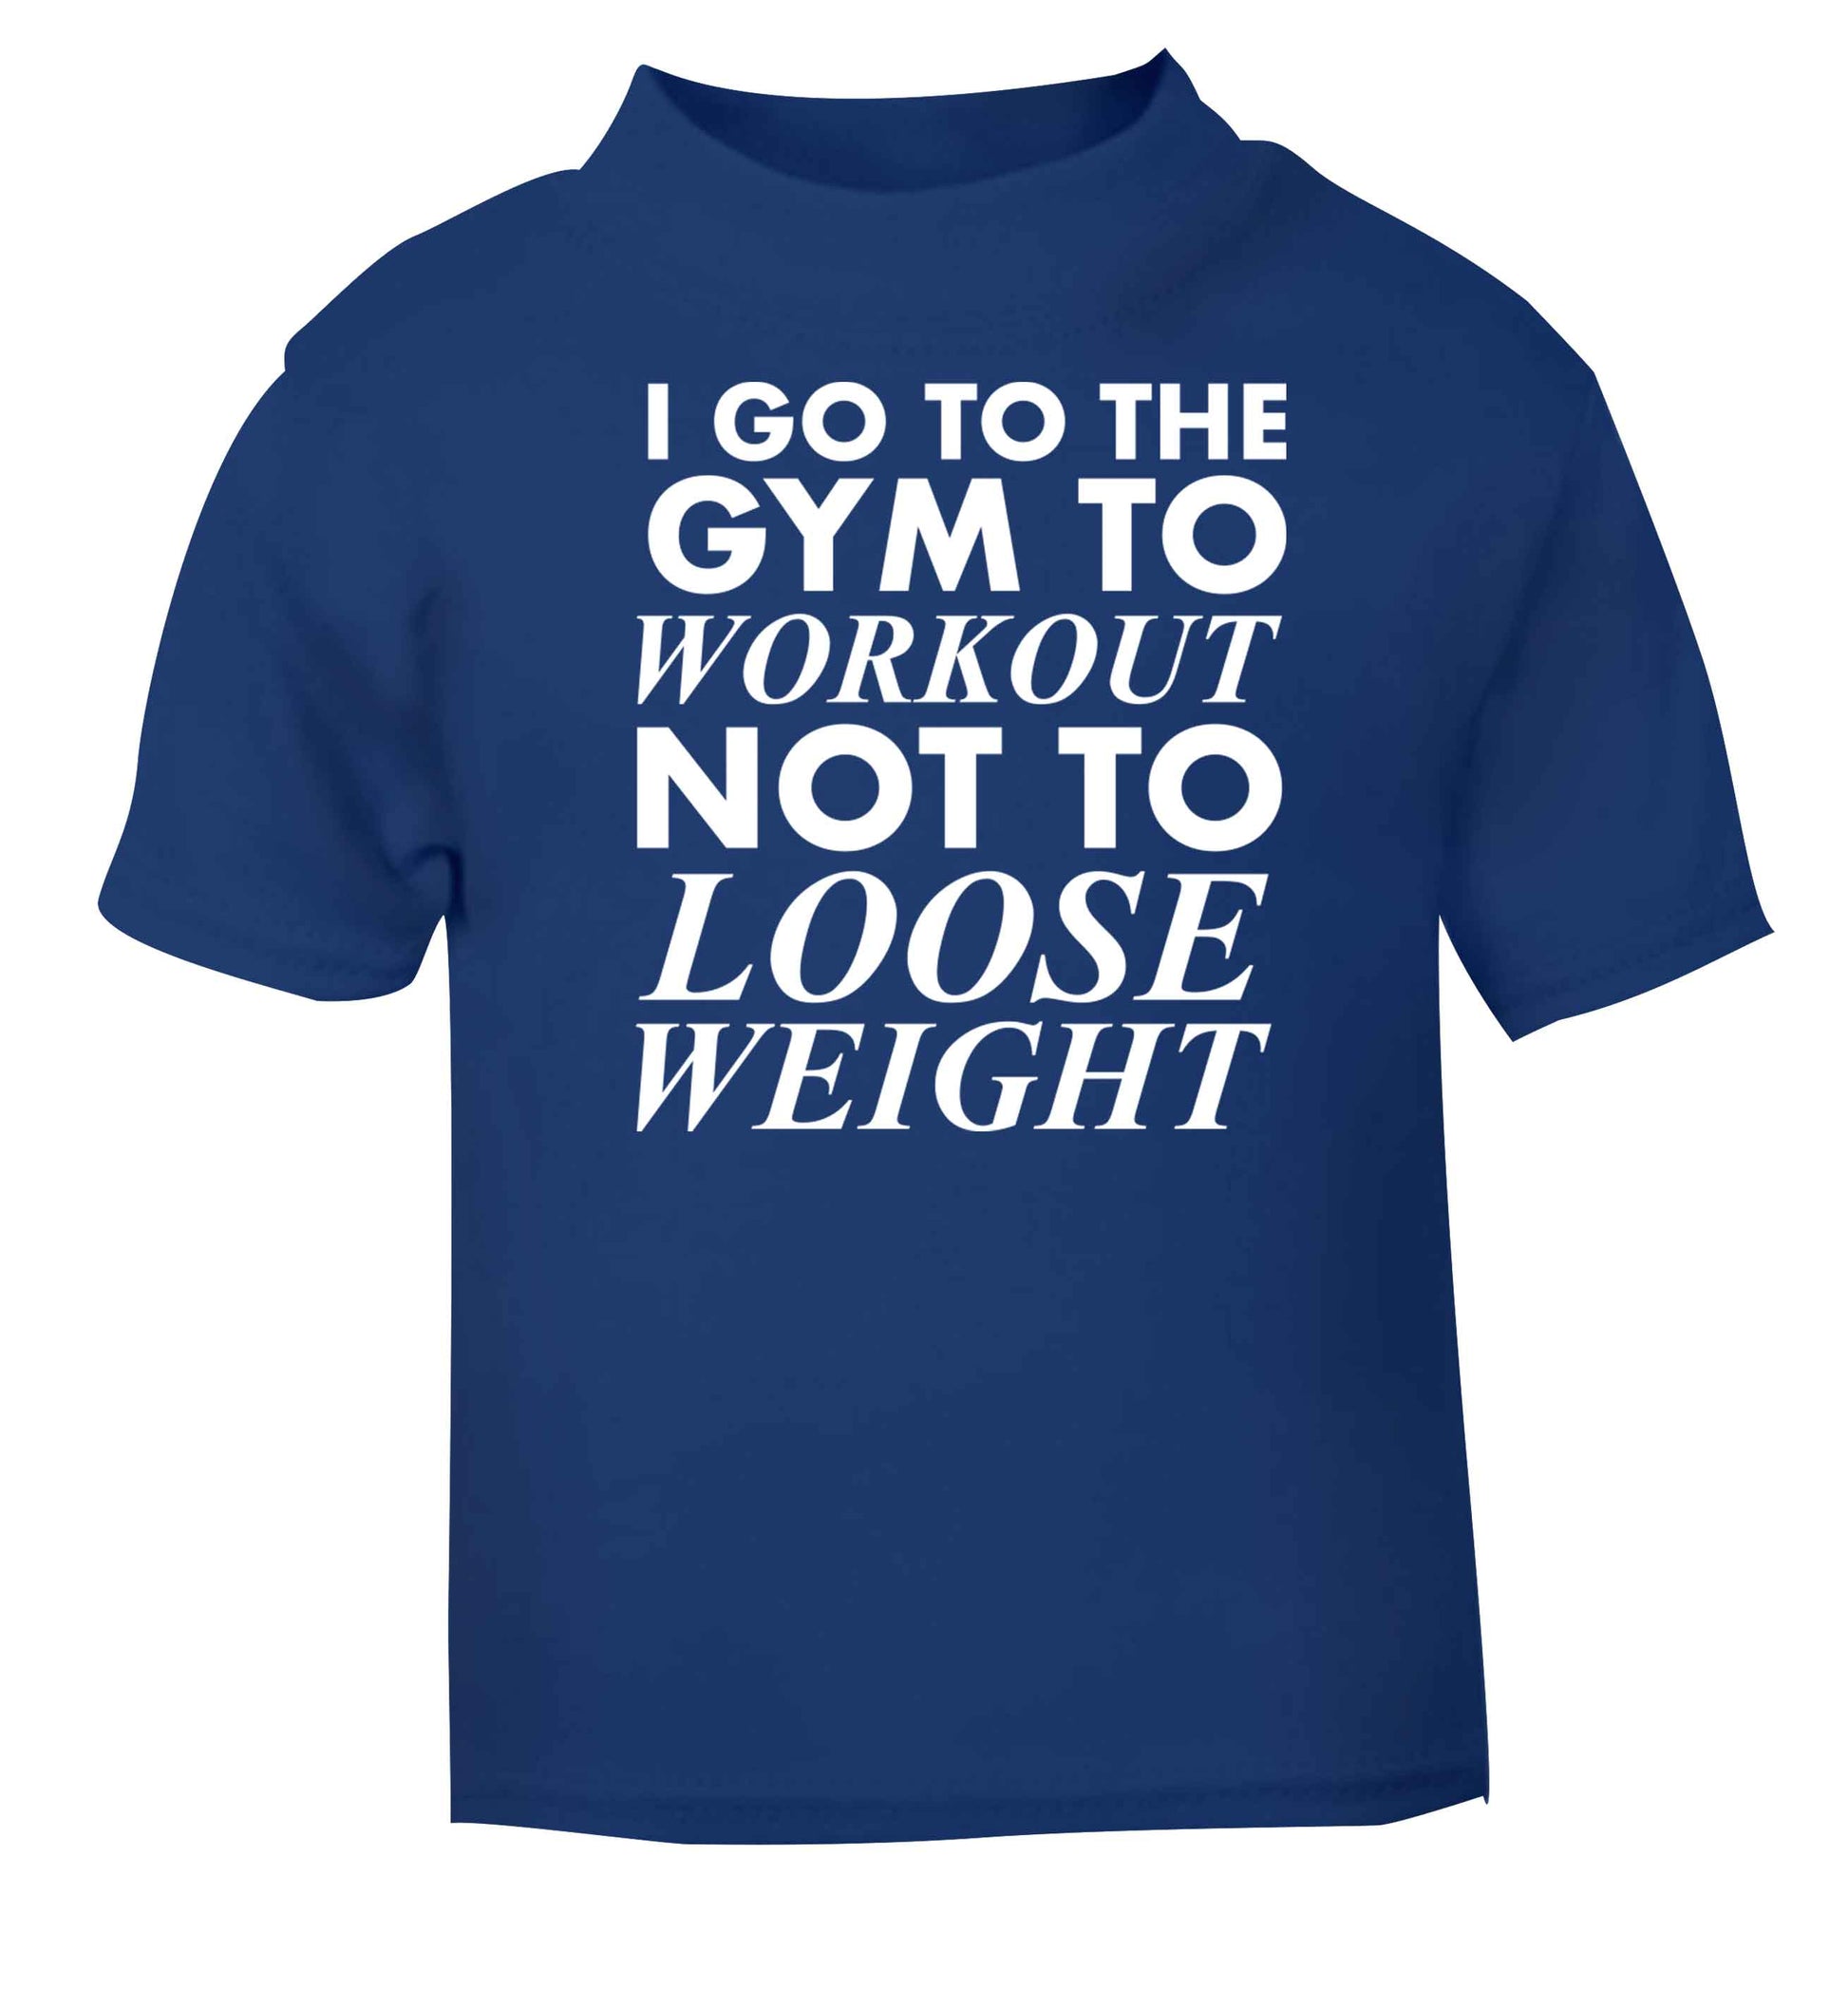 I go to the gym to workout not to loose weight blue baby toddler Tshirt 2 Years